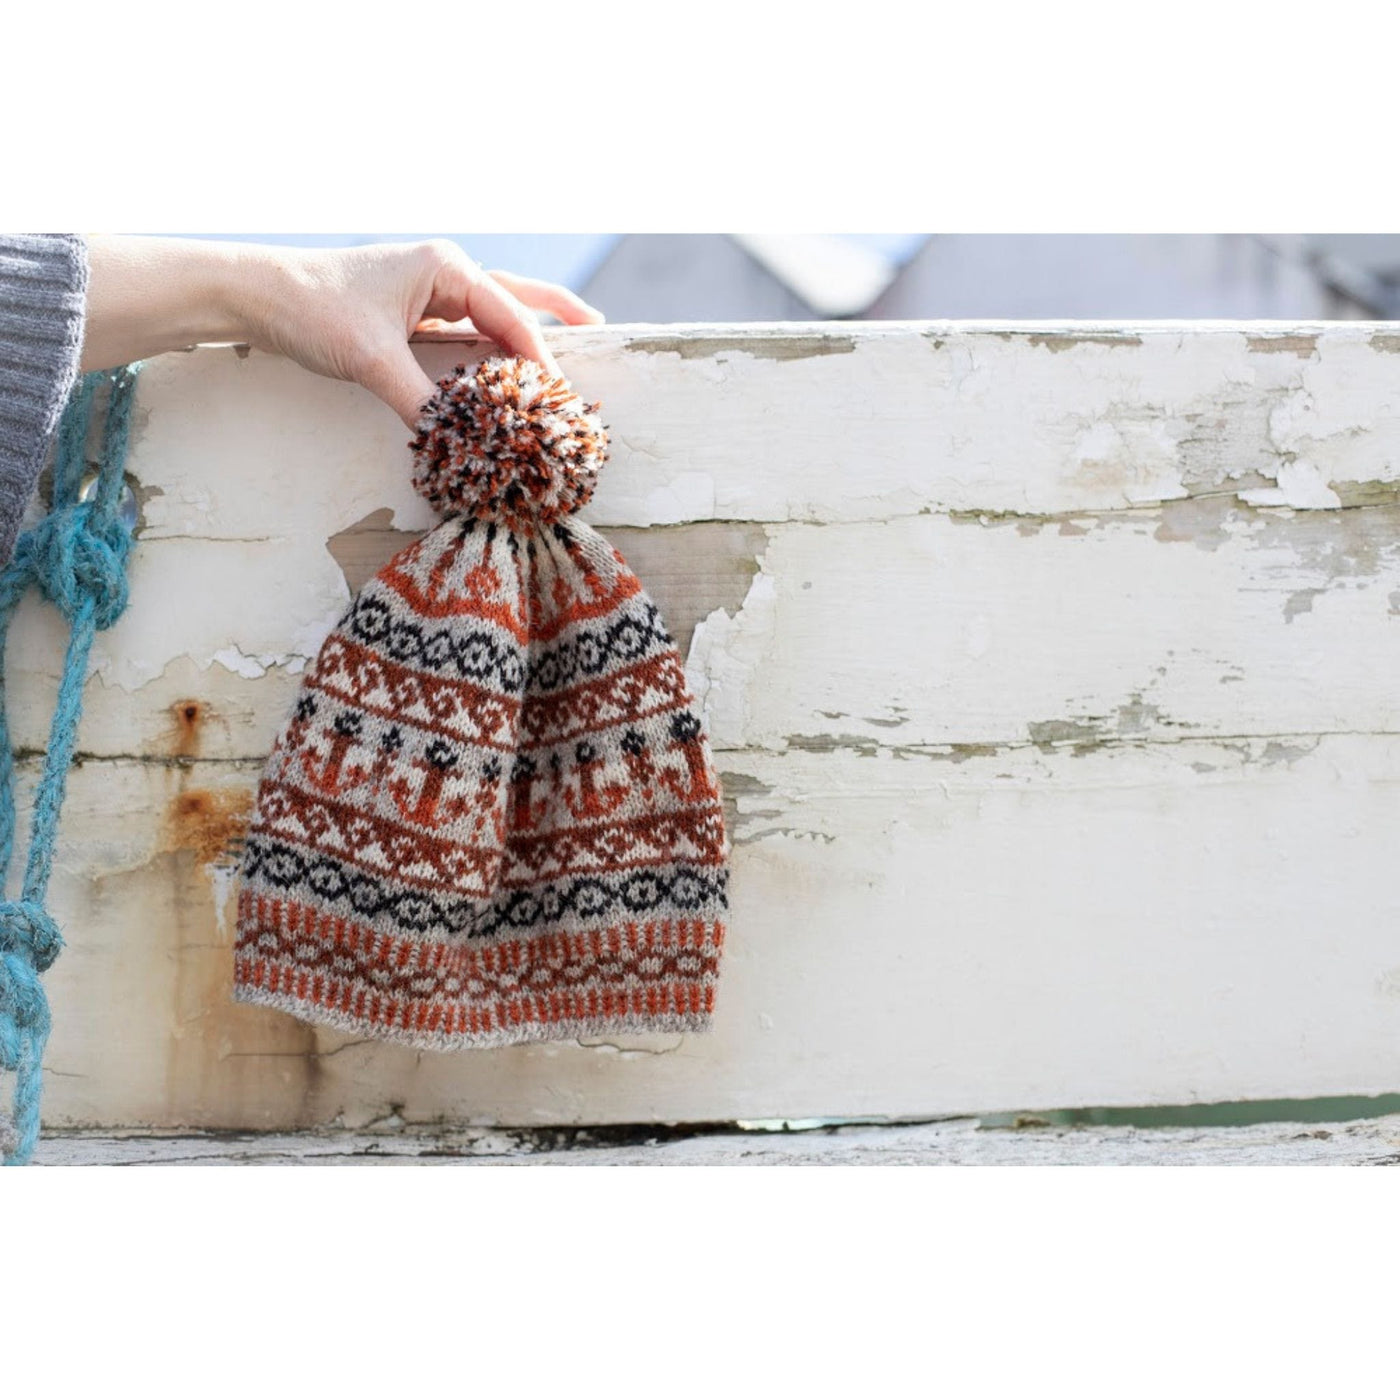 The Bonnie Isle Hat is being held agains a white background. This hat uses 6 cakes of Uradale 2ply Jumper Weight Yarn in Neutrals and two shades of orange.